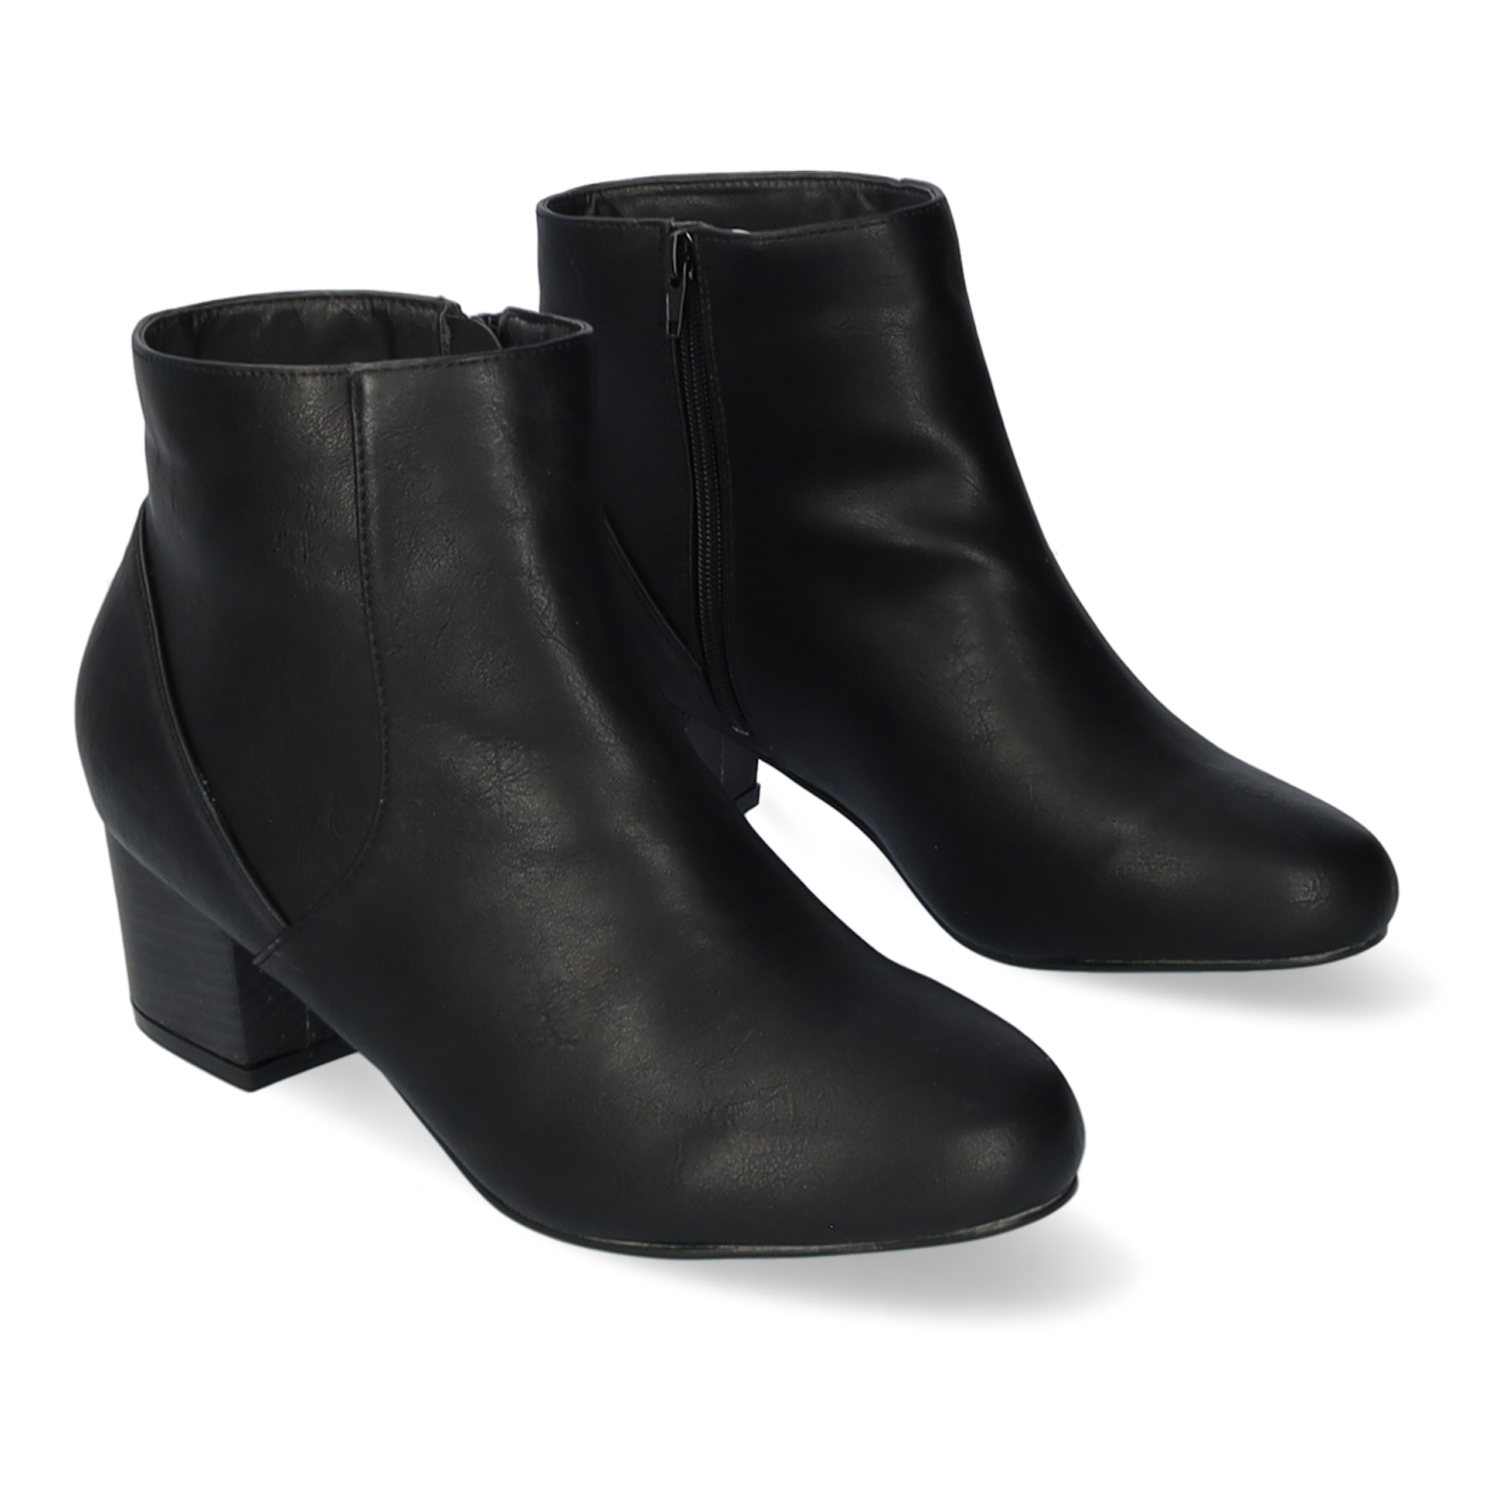 Heeled booties in black faux leather 